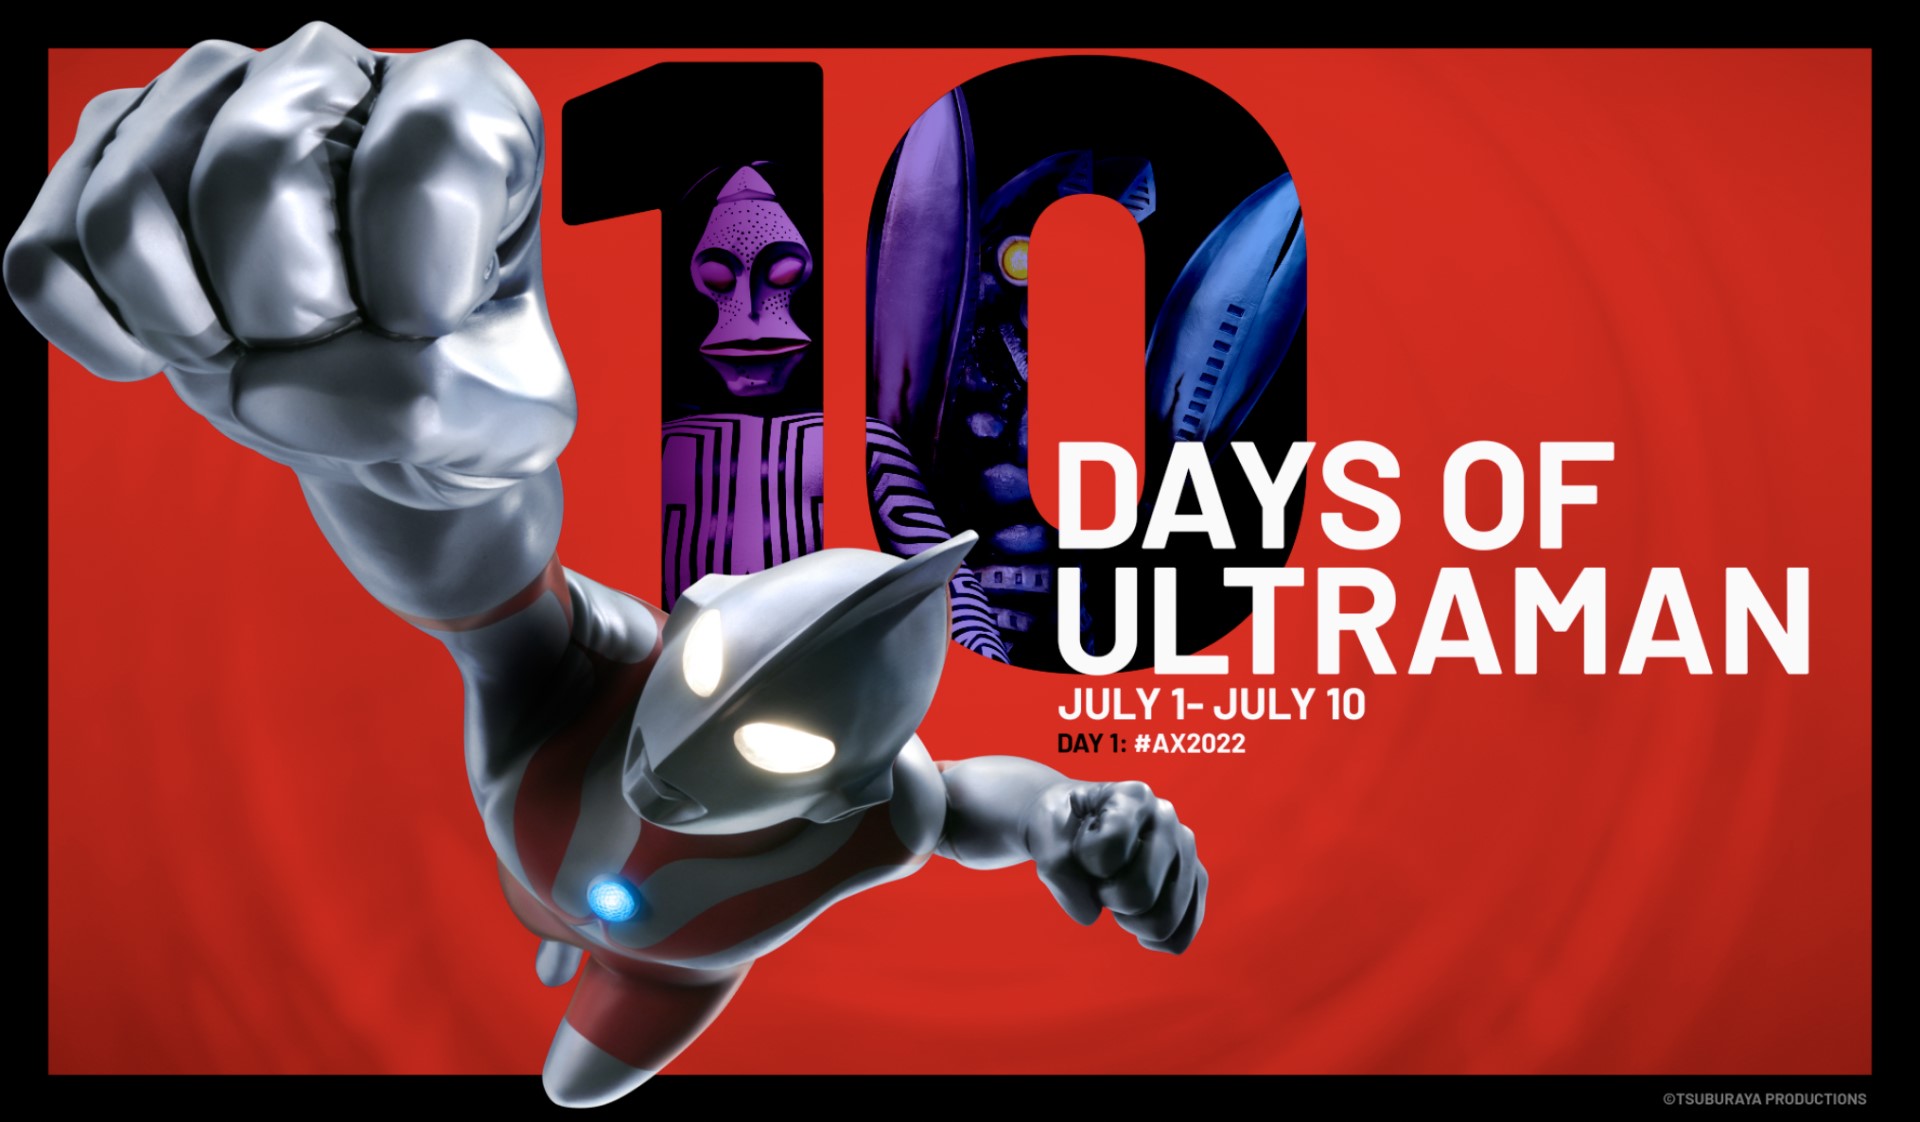 THE 10 DAYS OF ULTRAMAN ANNOUNCED BY ULTRAMAN CONNECTION